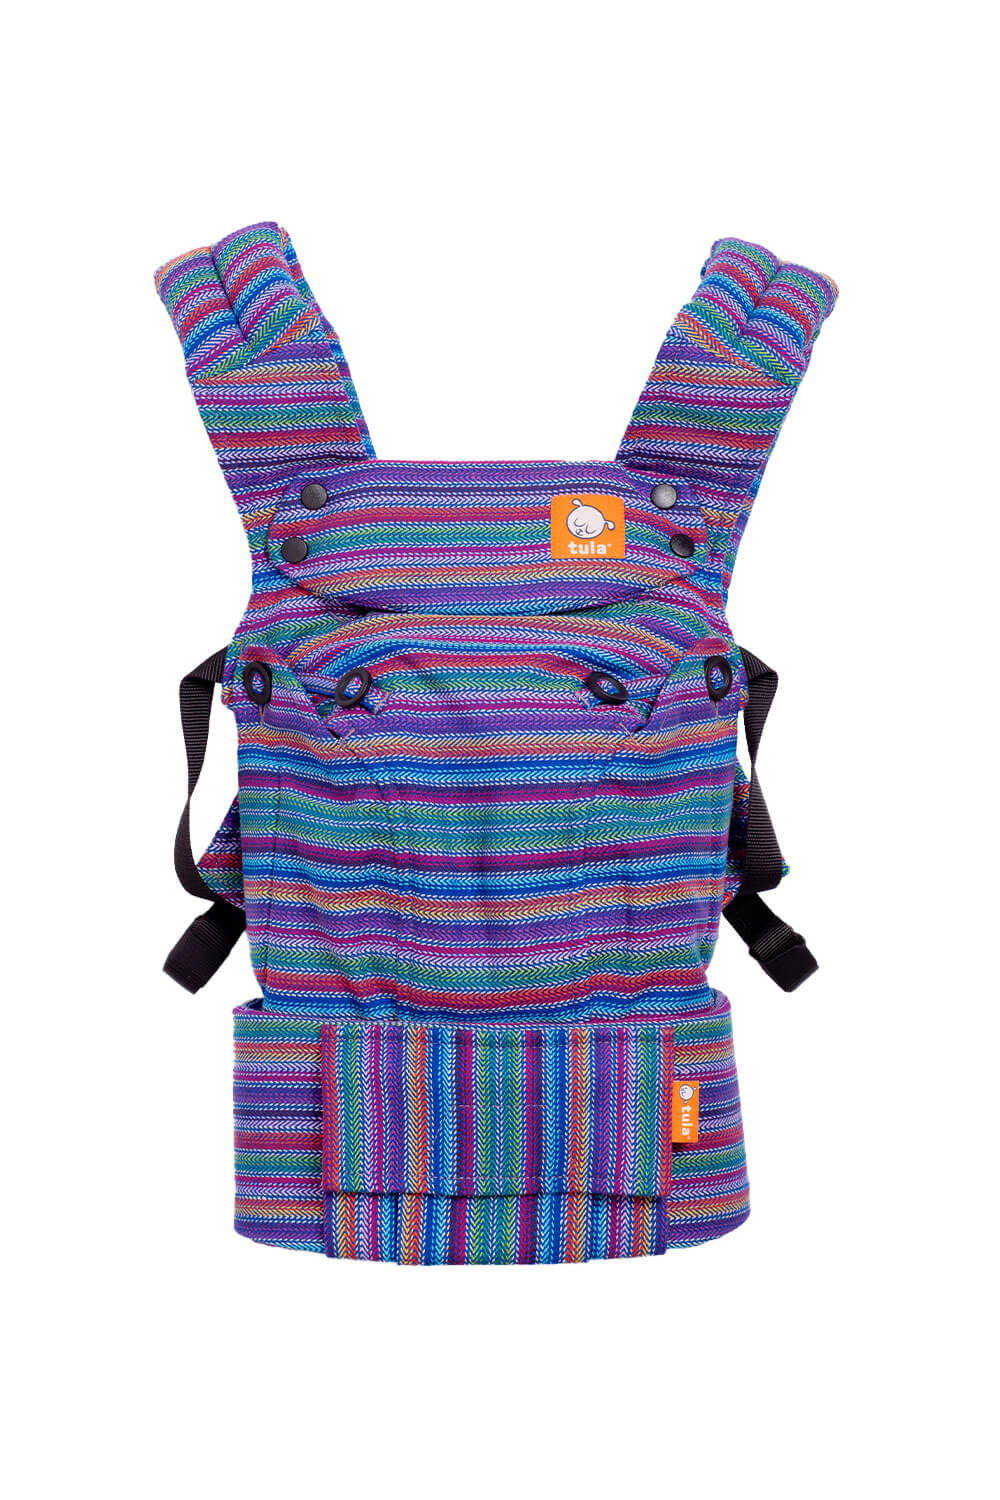 Totonicapan - Signature Handwoven Explore Baby Carrier